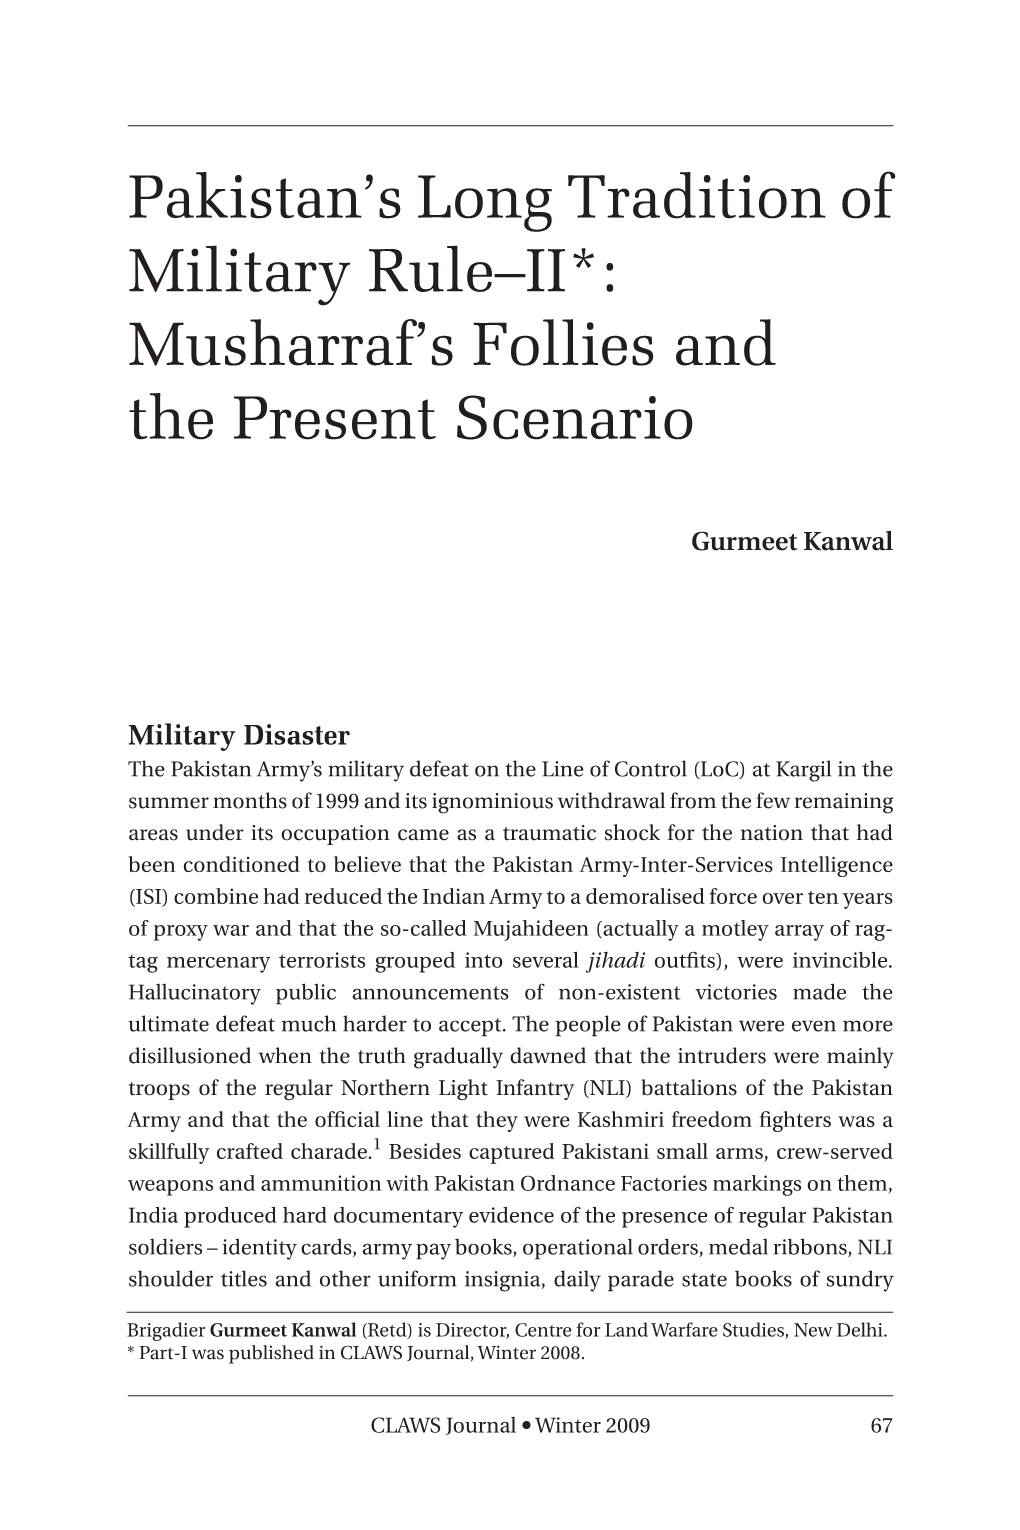 Pakistan S Long Tradition of Military Rule II: Musharraf S Follies and the Present Scenario, By